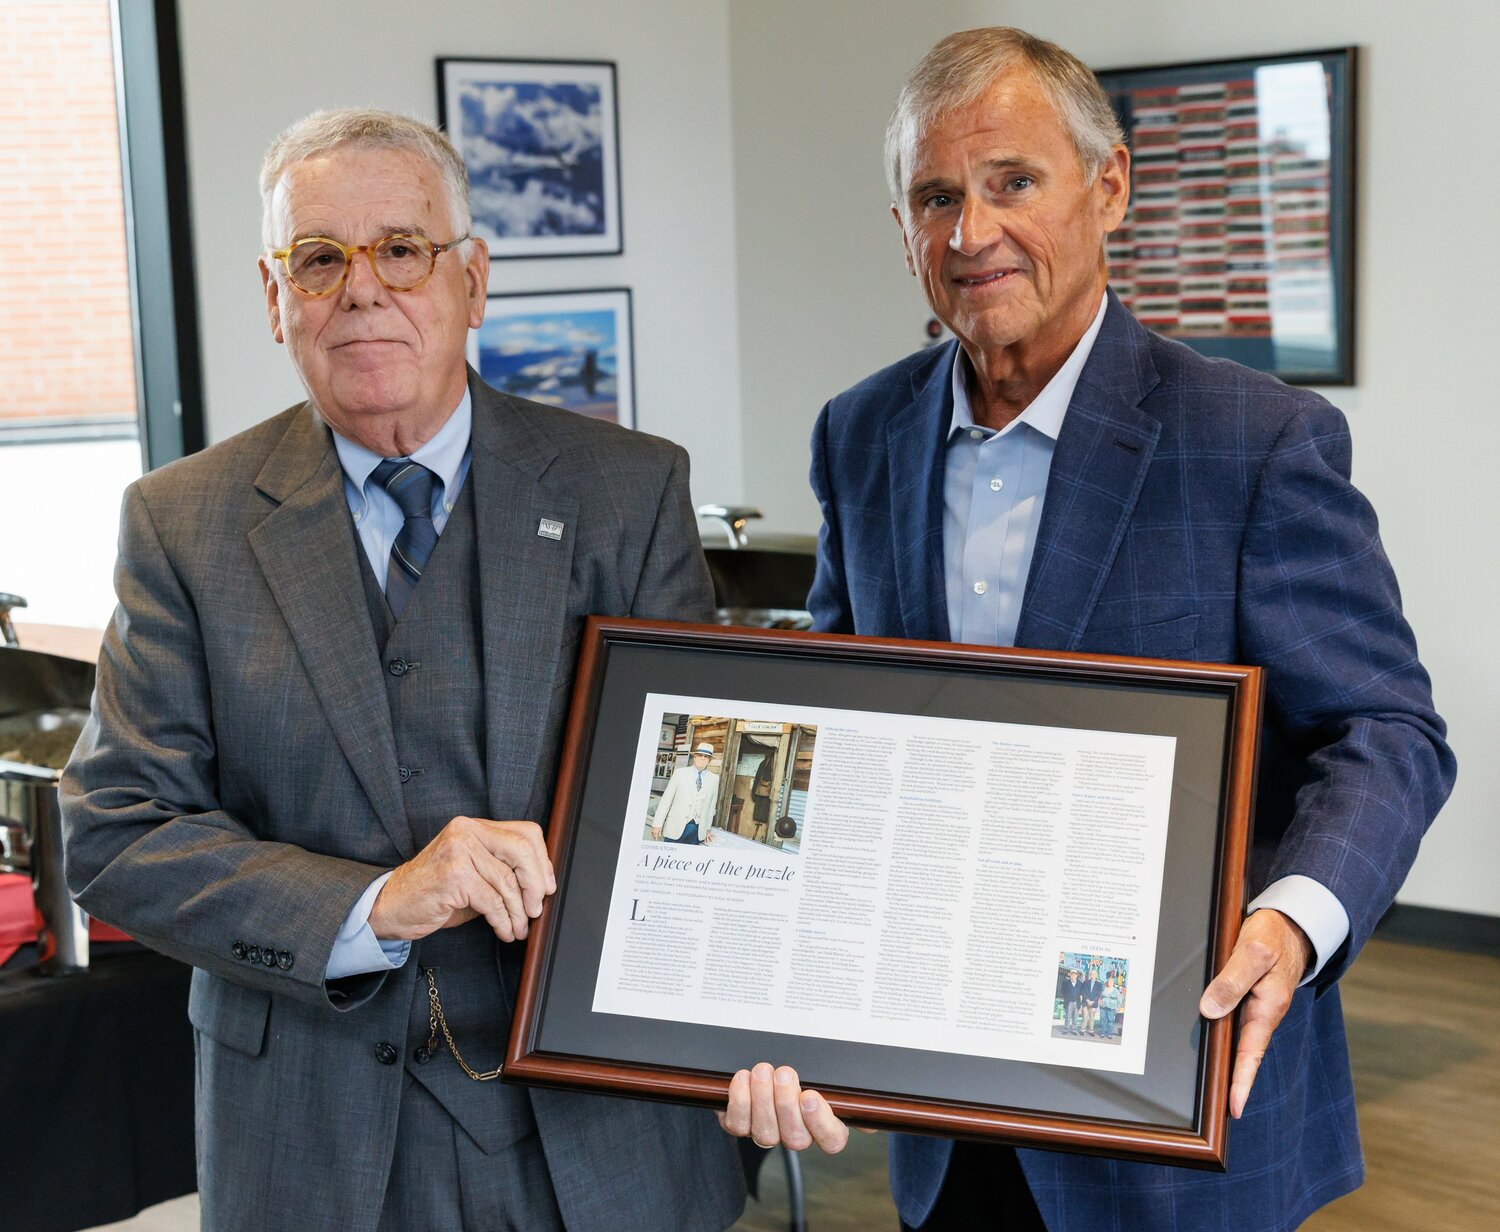 CityView publisher Tony Chavonne, right, presents Bruce Daws with the Downtown Visionaries award on Thursday at Segra Stadium.